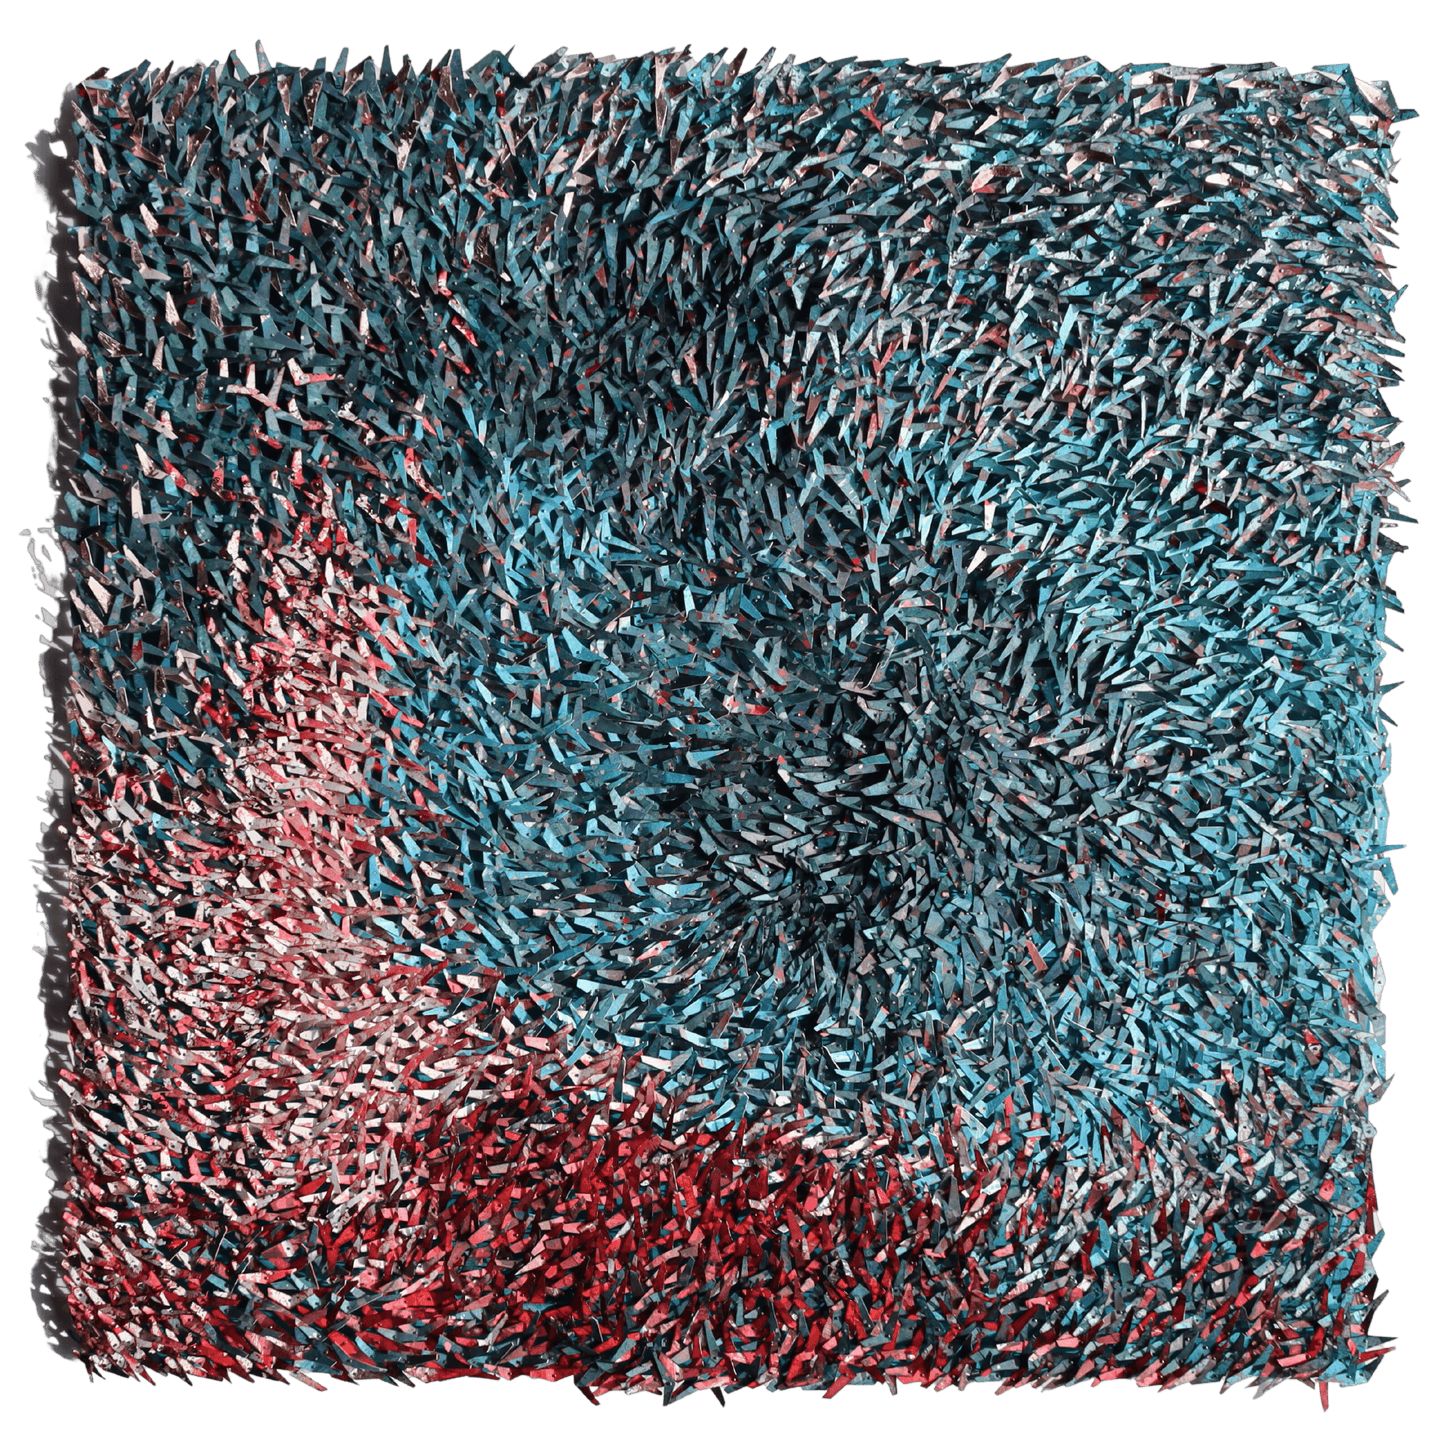 Red and Blue Murmuration